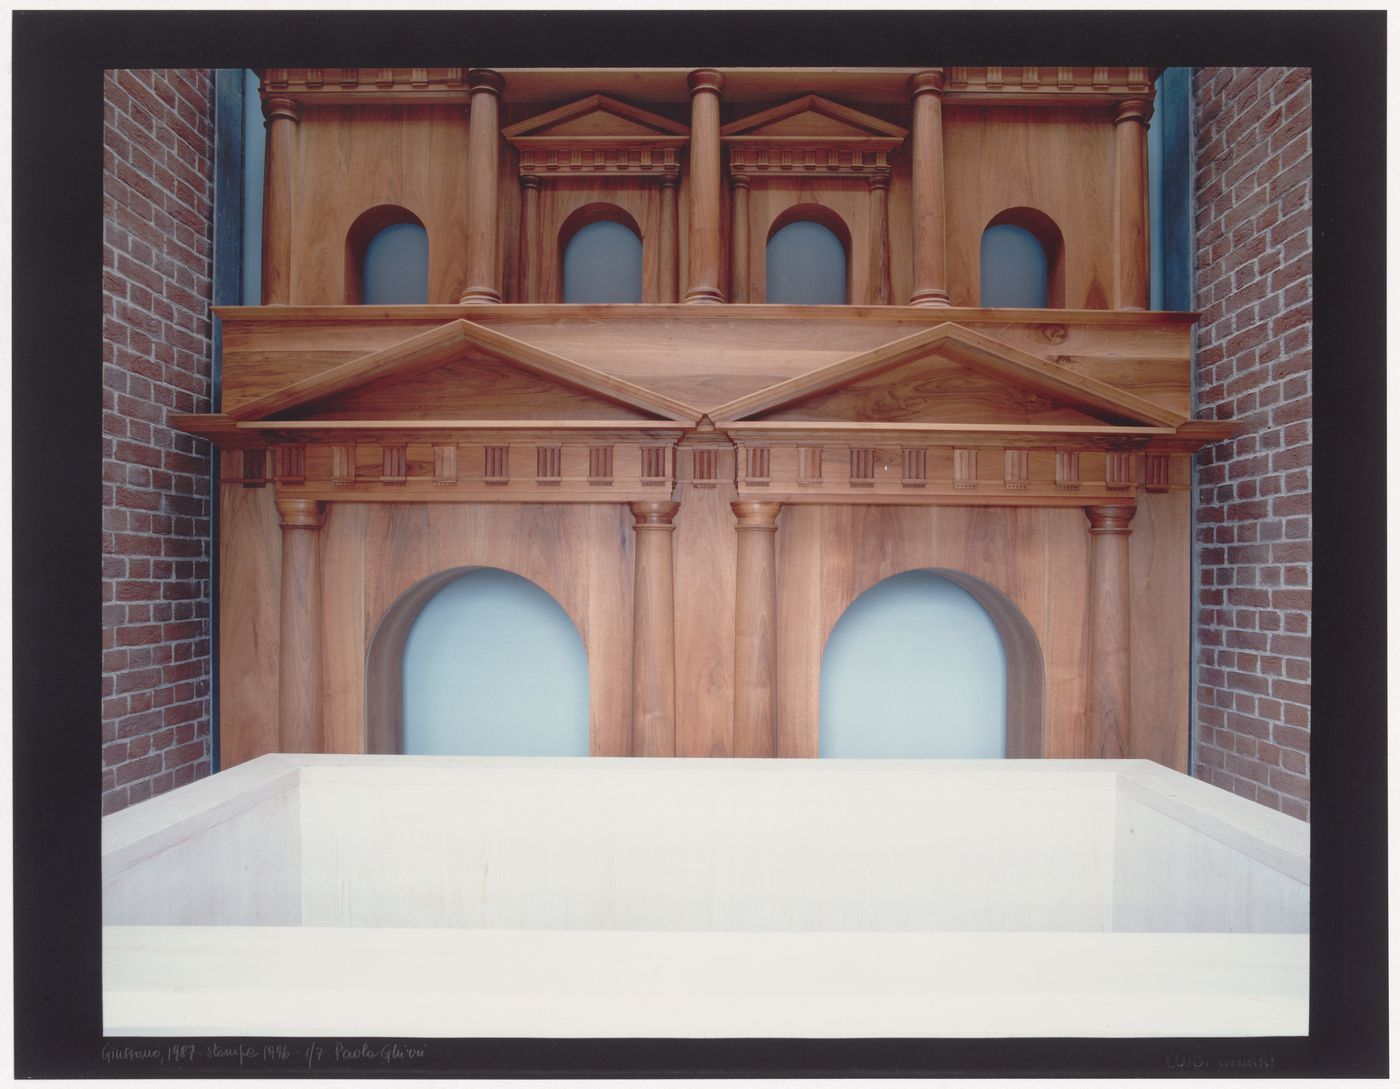 Molteni Funerary Chapel, Giussano, 1980; Interior detail showing the wooden reconstruction of a Roman city gate